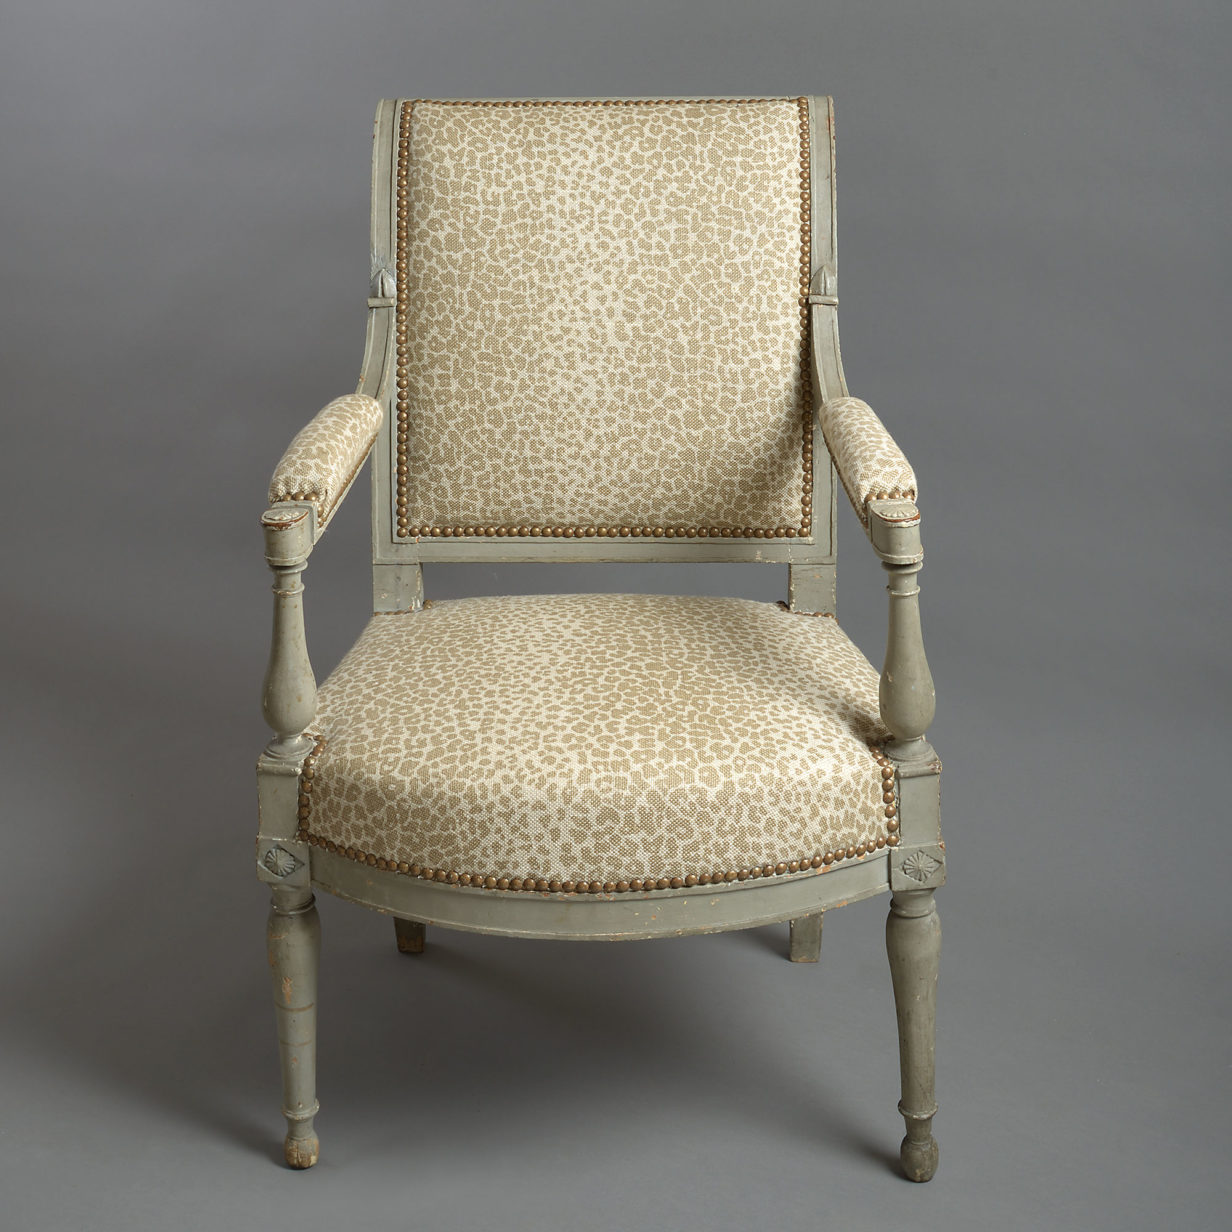 Late 18th century directoire period painted fauteuil armchair